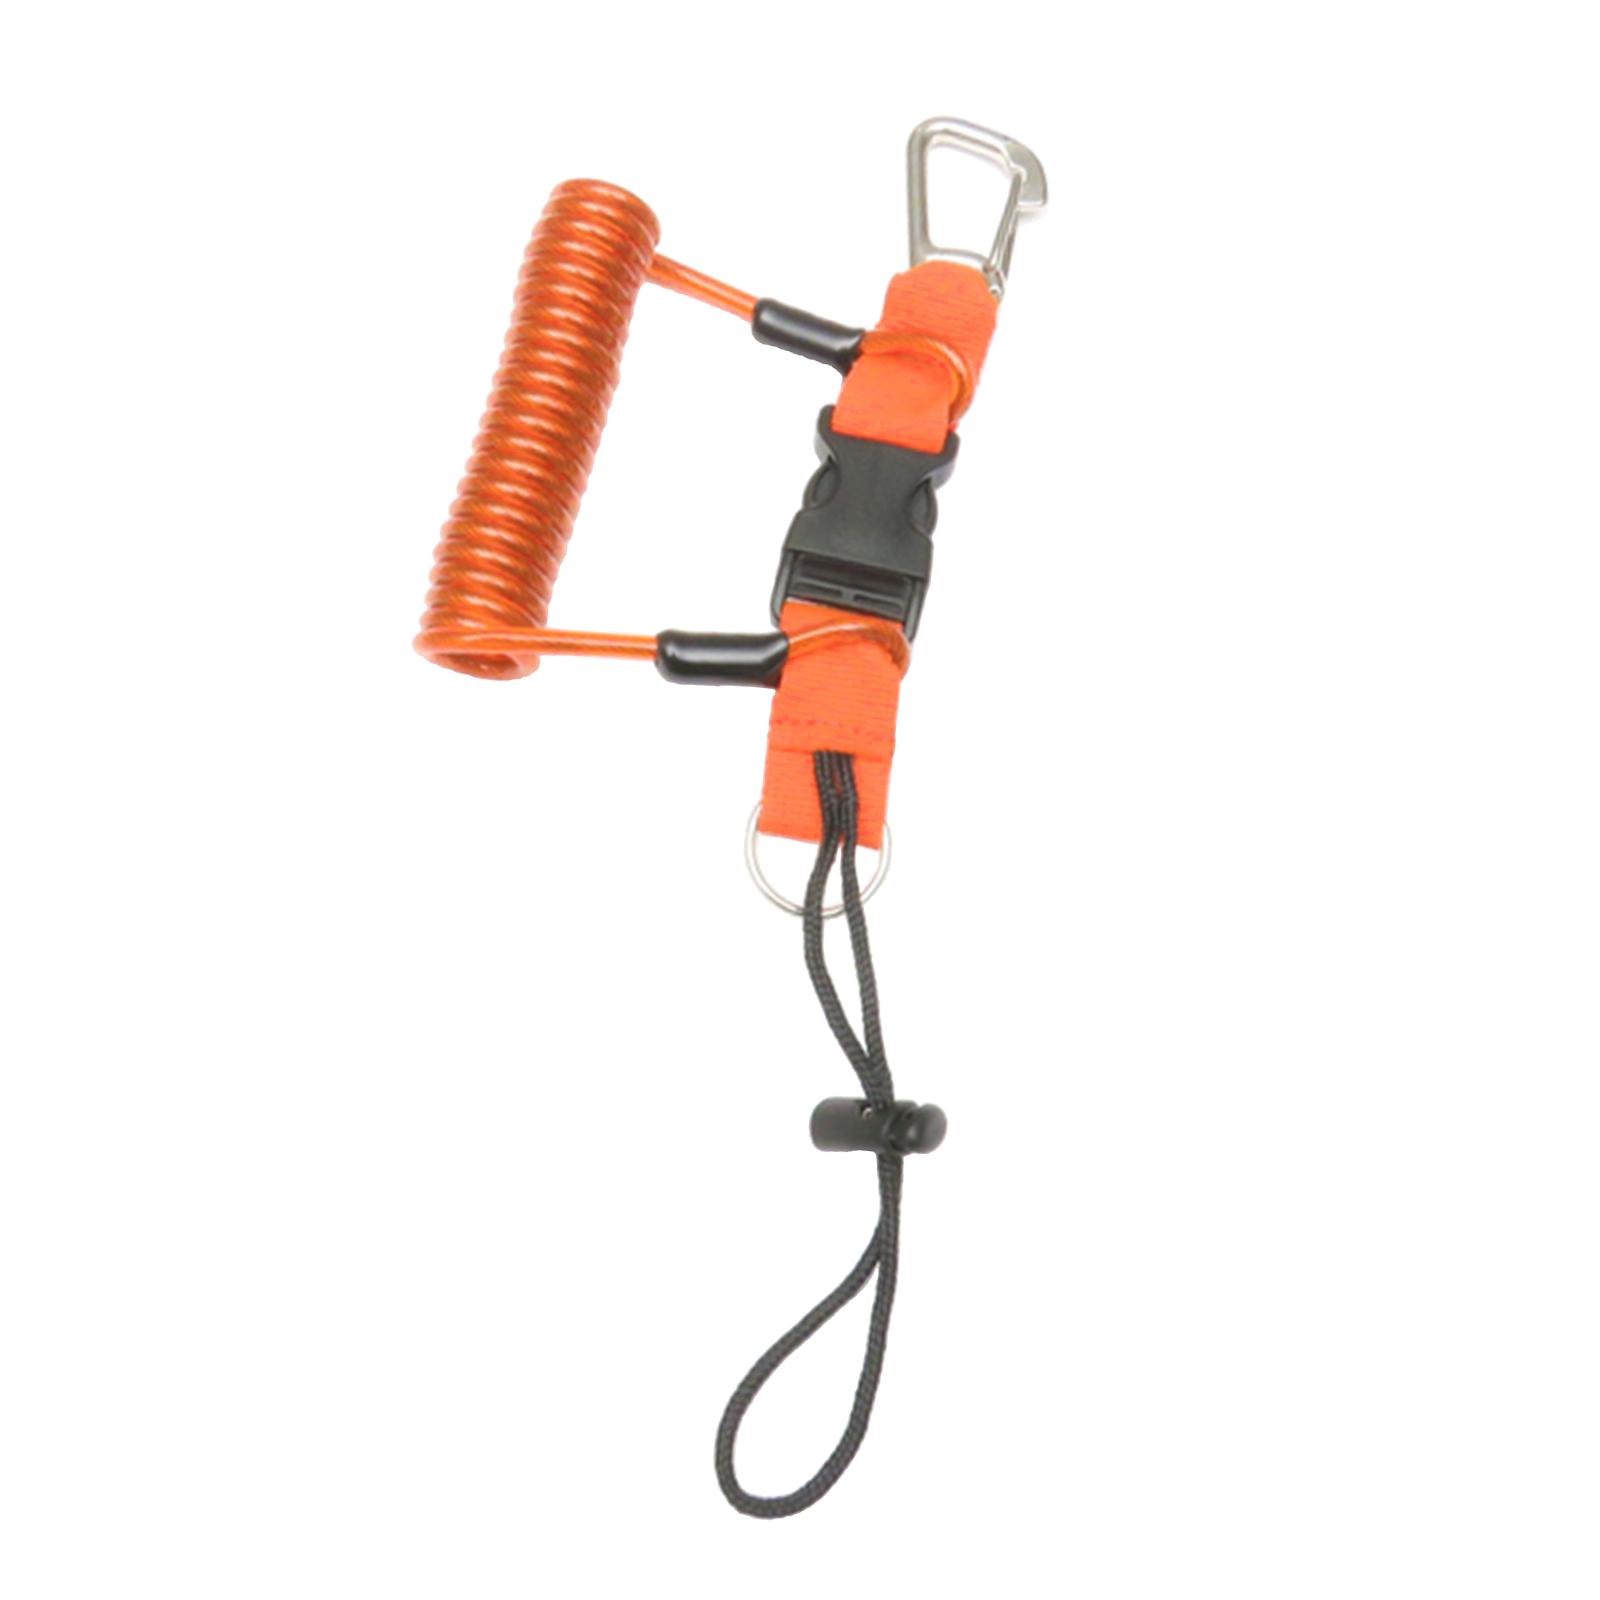 Scuba Safety Diving Lanyard Coil Rope  with Quick Release Buckle Orange